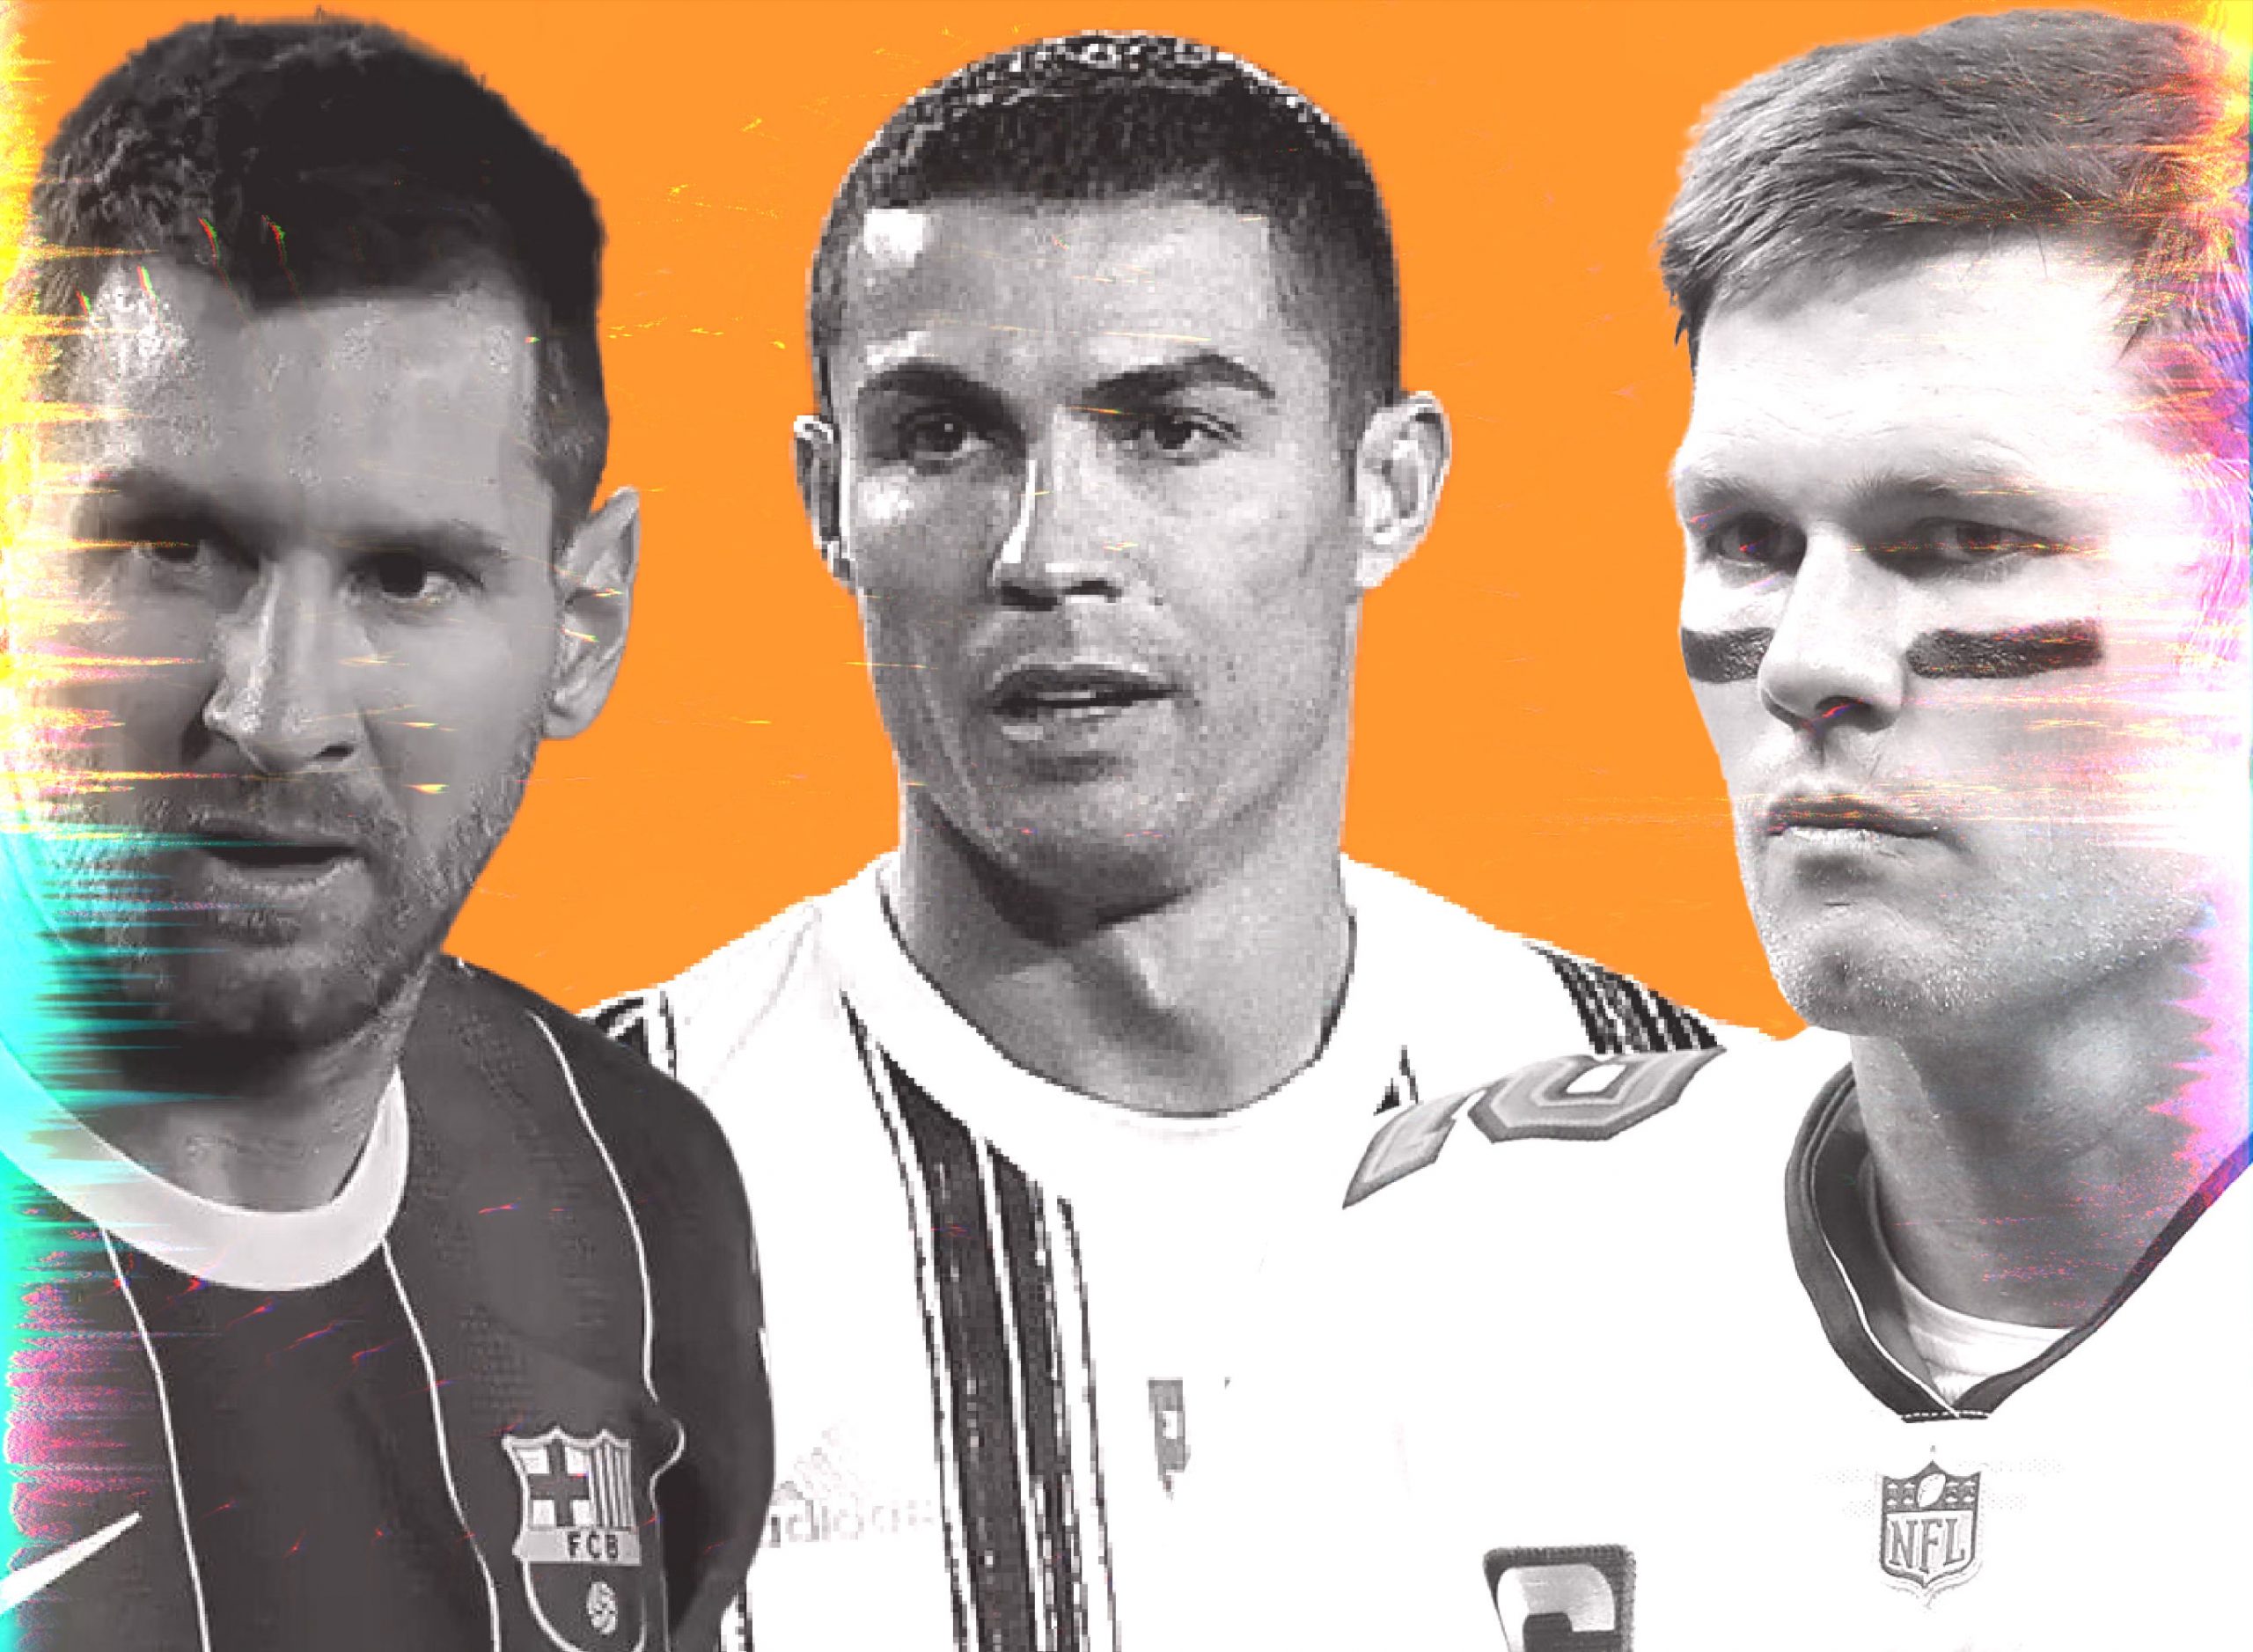 If you think Tom Brady is more famous than Messi and Ronaldo, please pull your head out of your a–